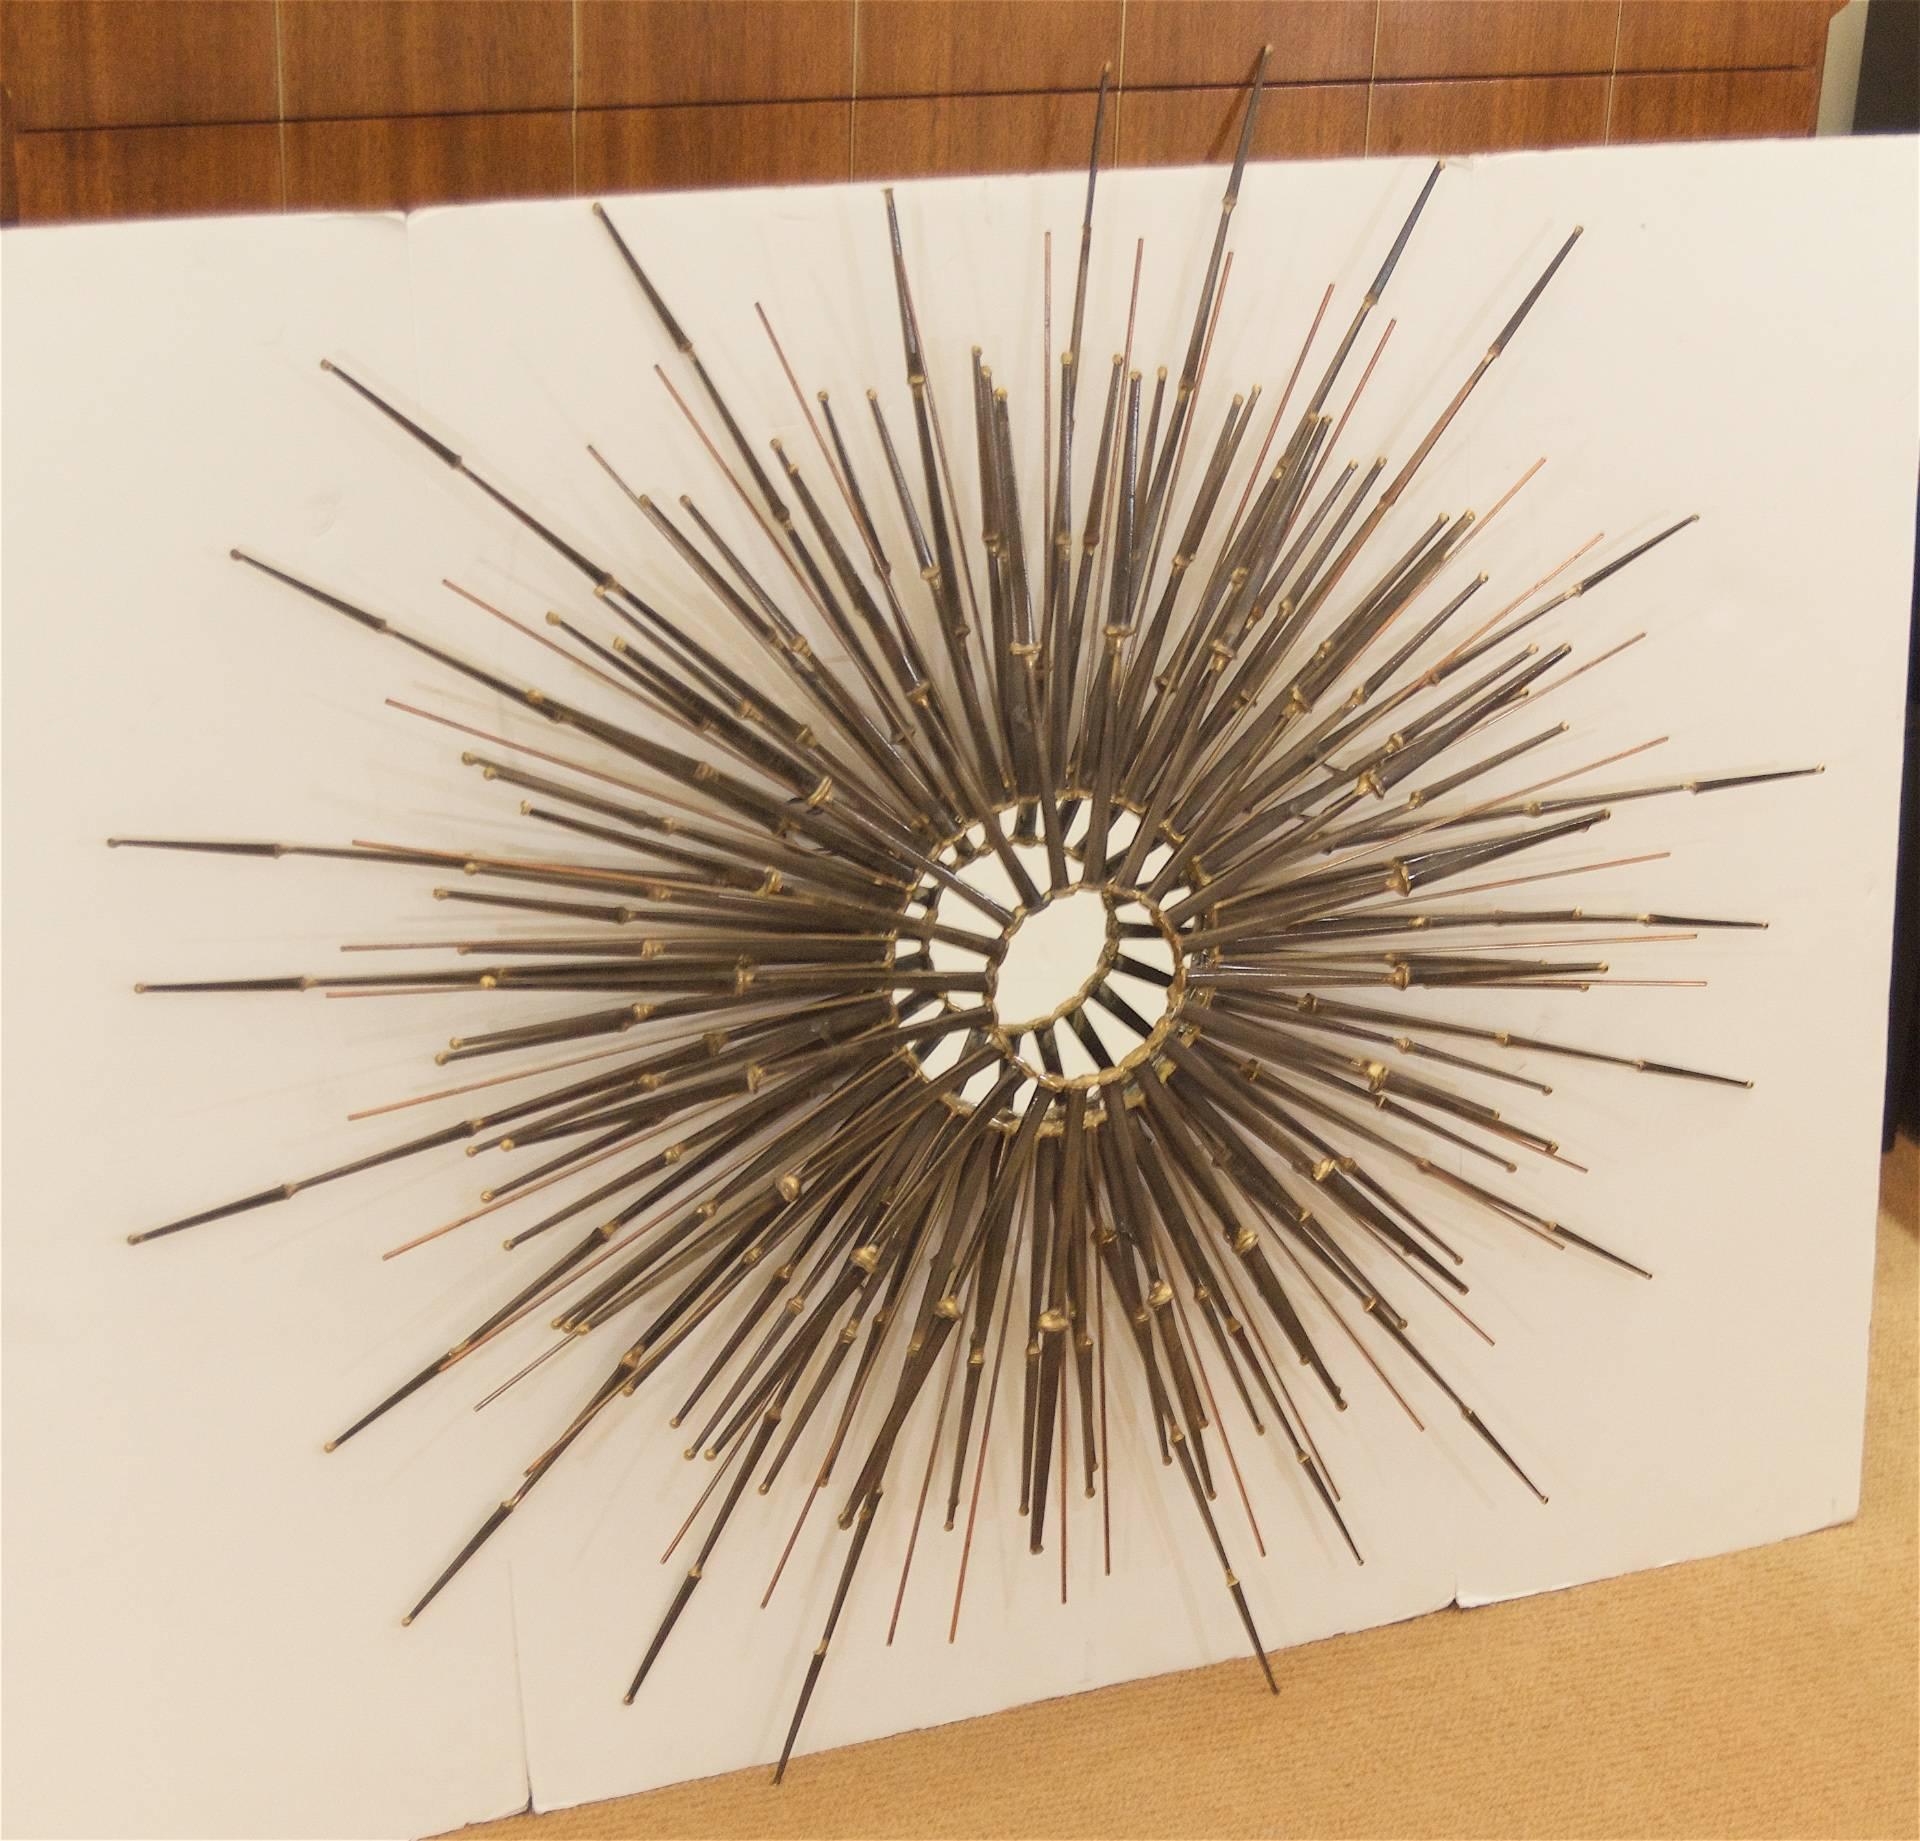 Grand scale sunburst wall hanging comprised of welded masonry nails and metal rods, in a mix of original steel and gilt finish accenting. New central mirror

Signed B.H. Kelvin '74.